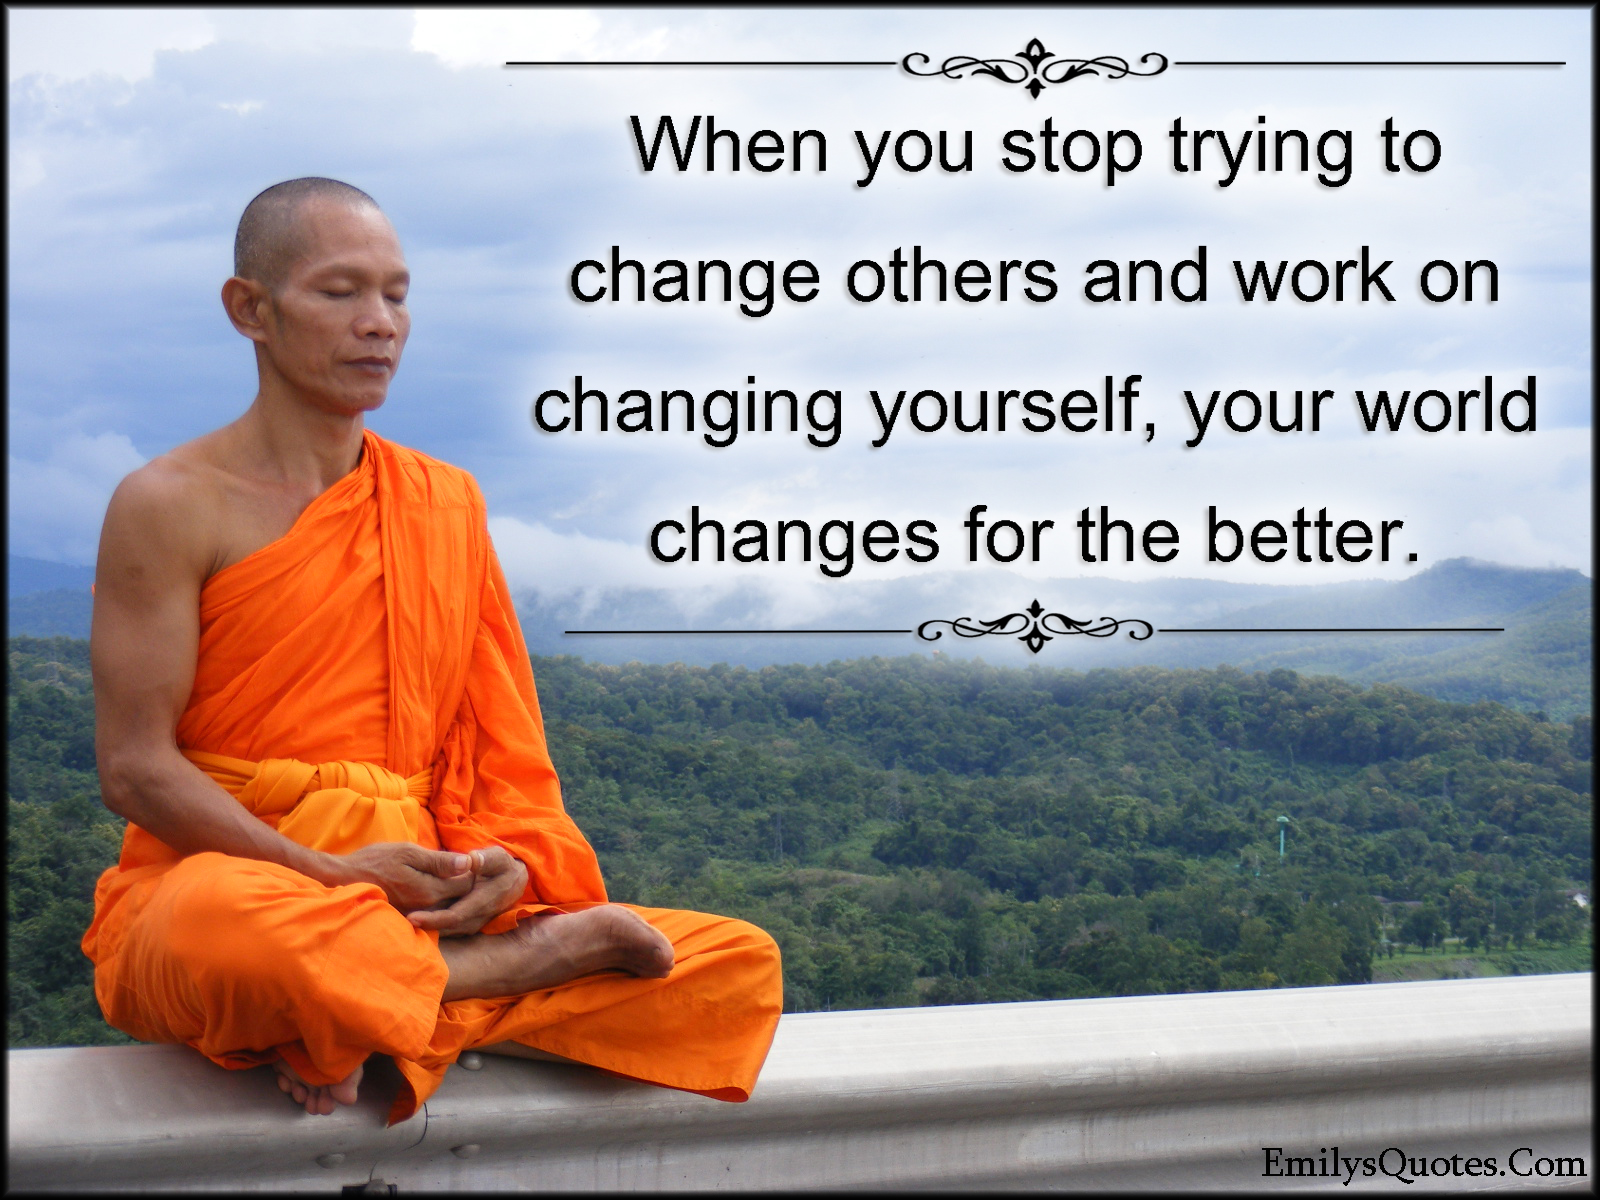 When you stop trying to change others and work on changing yourself, your world changes for the better